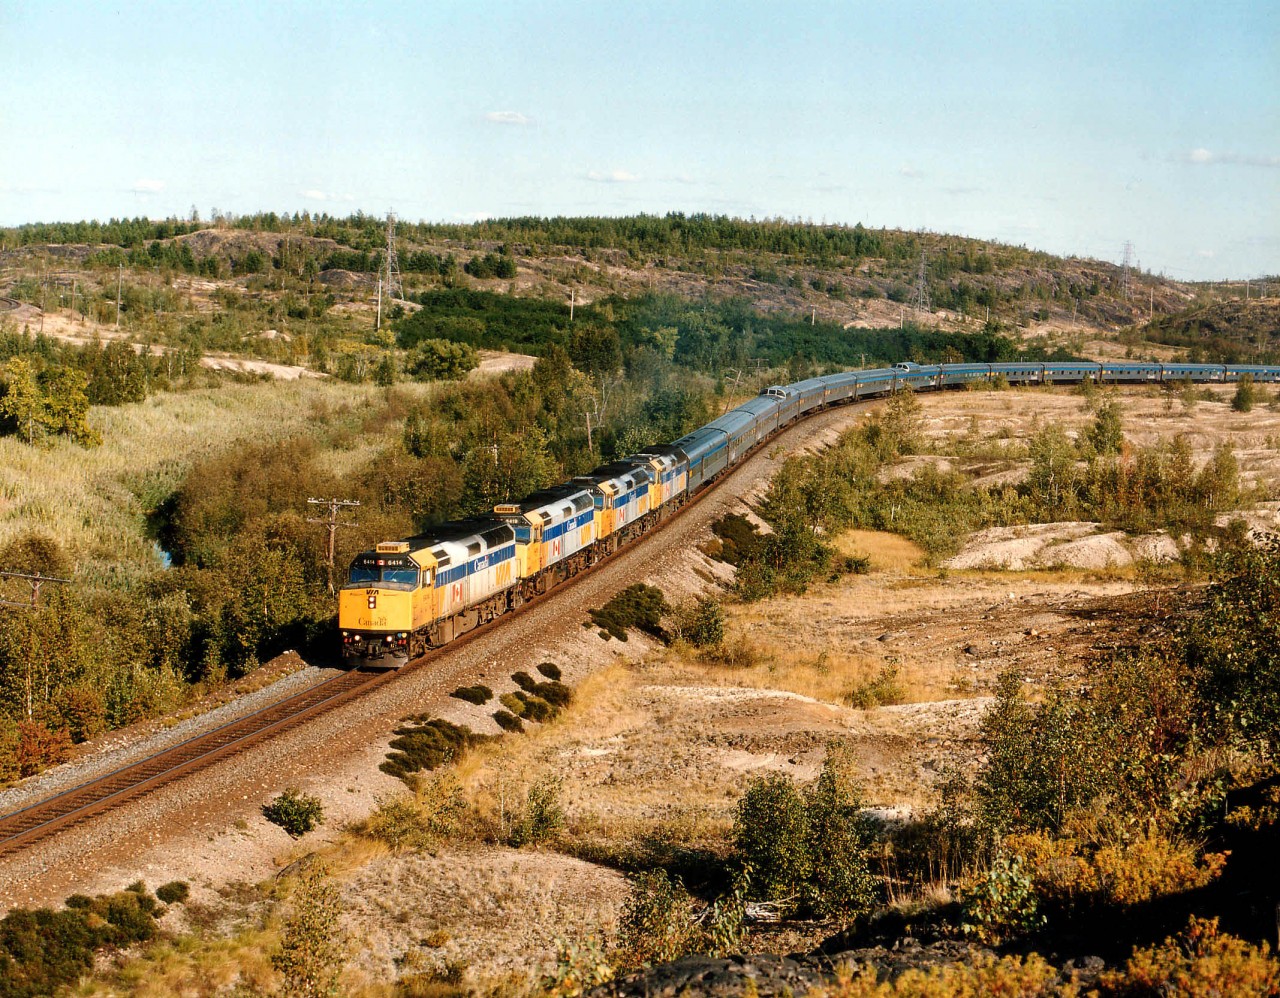 On the beautiful afternoon of Sept. 17, 2002 VIA #1 with VIA 6414, 6419, 6434 and 6454 with a very long train approach the Coniston crossing of CP-OVR Cartier subdivision heading Northwest.